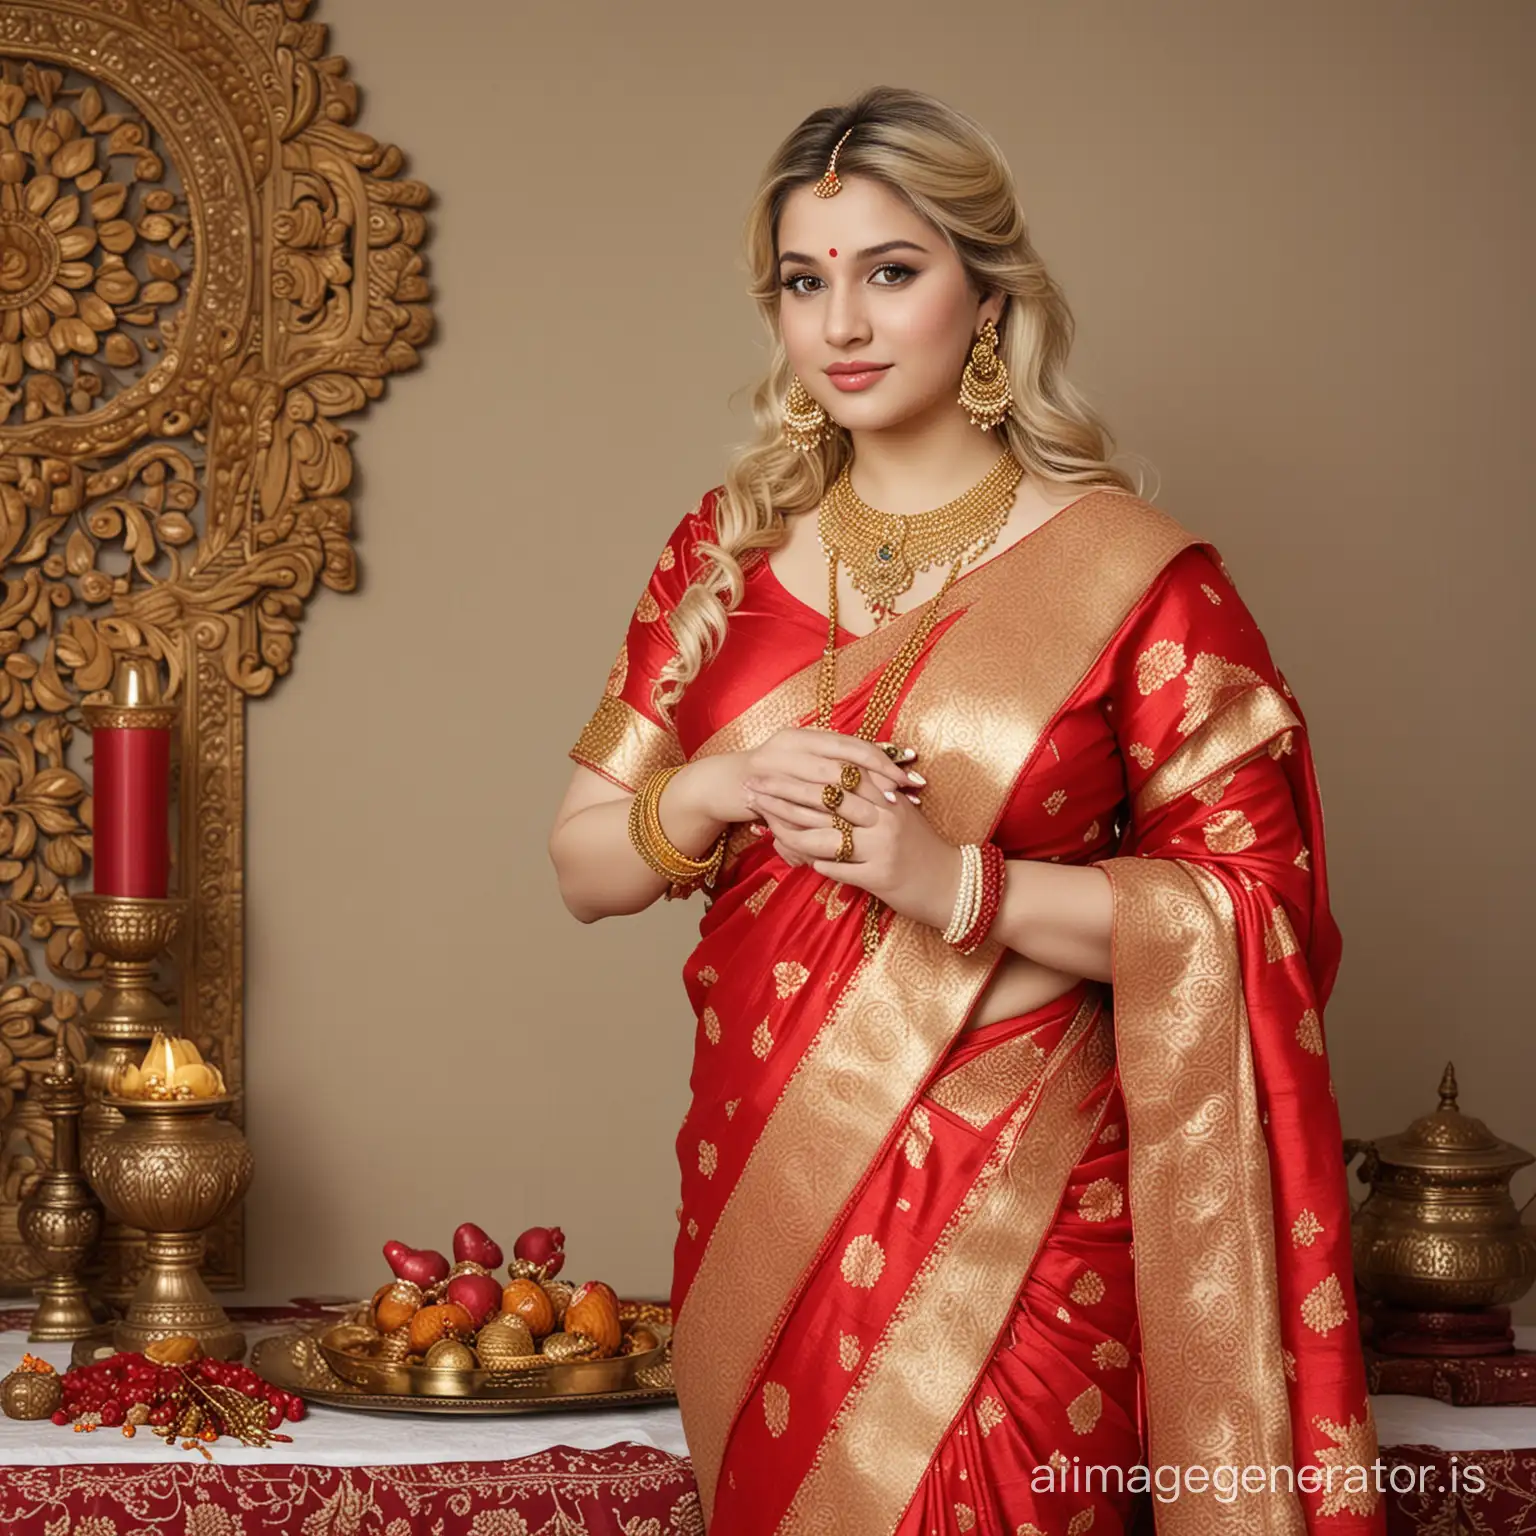 Generate full body image of a 18 year old very busty fatty breast, big fatty thighs, big fatty hand arm, big fatty ass and curvy completely American mature fatty chubby obese very fair white skin woman blonde hair wearing traditional style banarasi saree and wearing sindur in forehead and red and white bangles in hand and wearing gold necklace with gold jewelry in India puja program